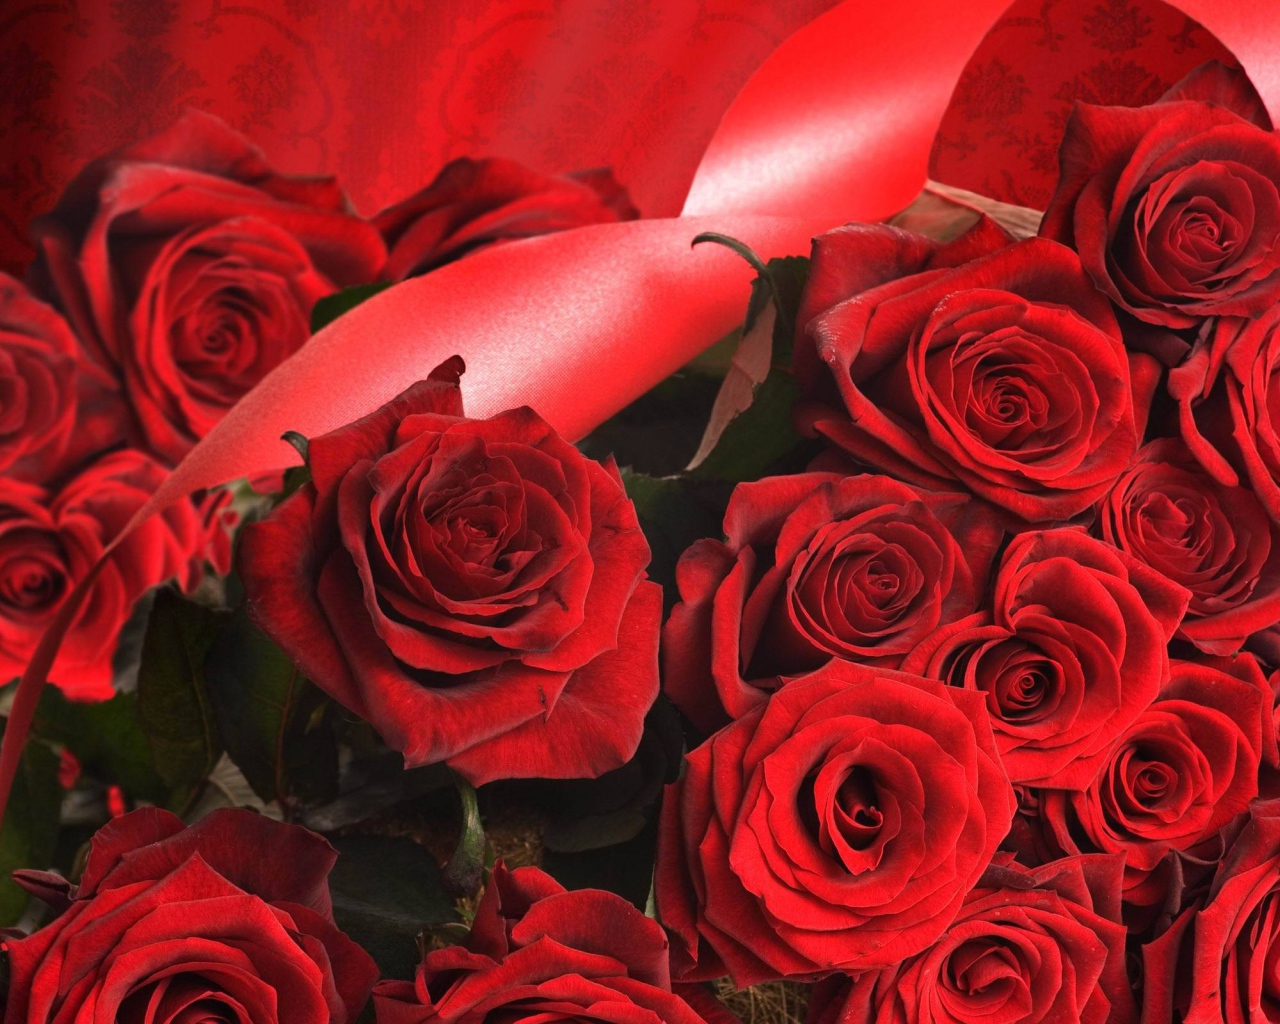 Red roses on March 8 with red ribbons